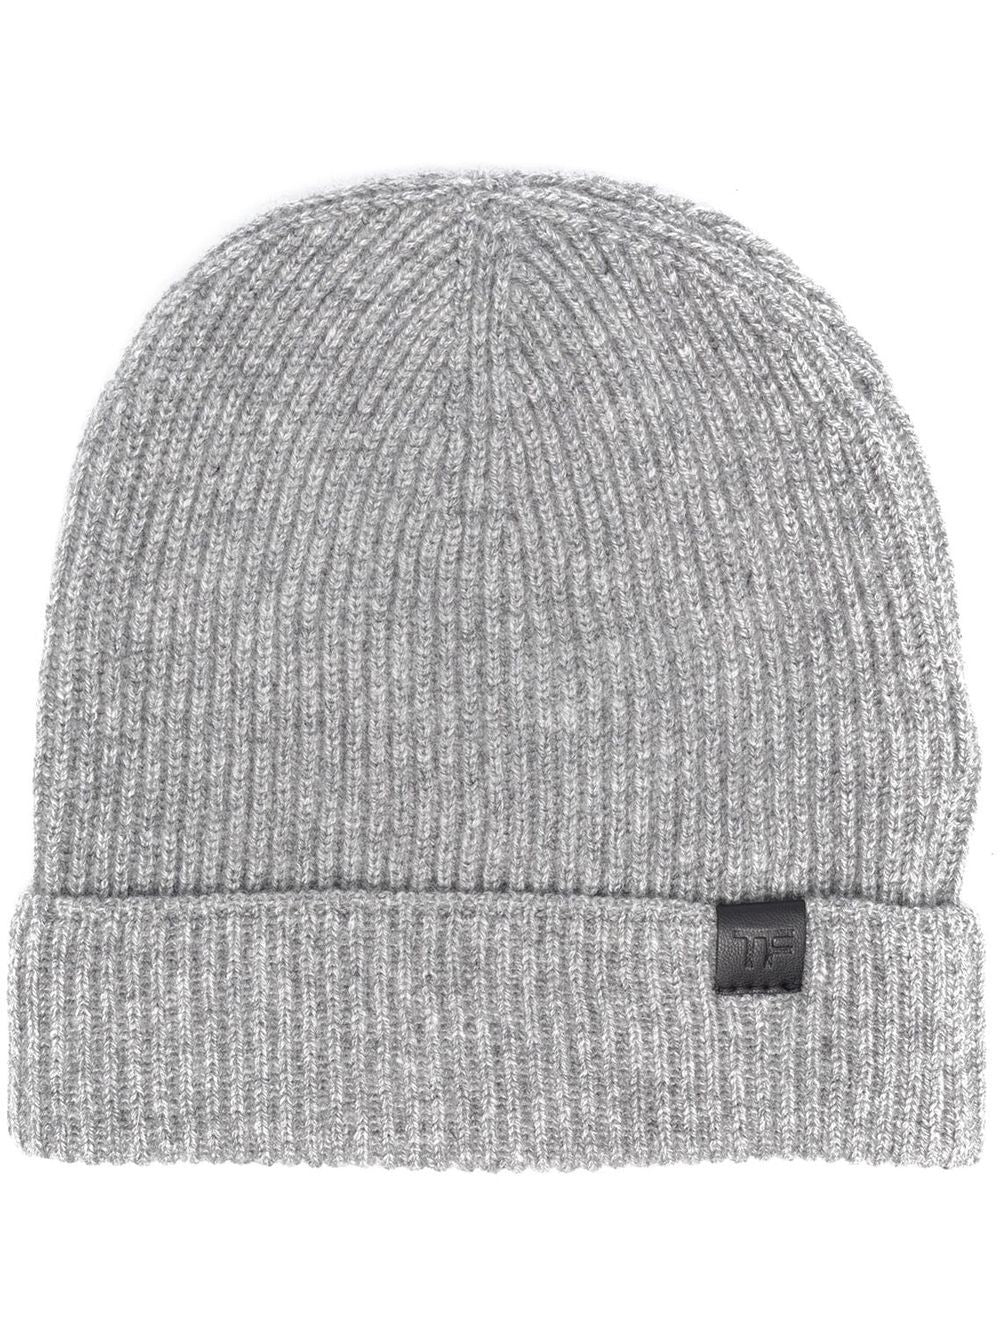 Tom FordCashmere beanie at Fashion Clinic